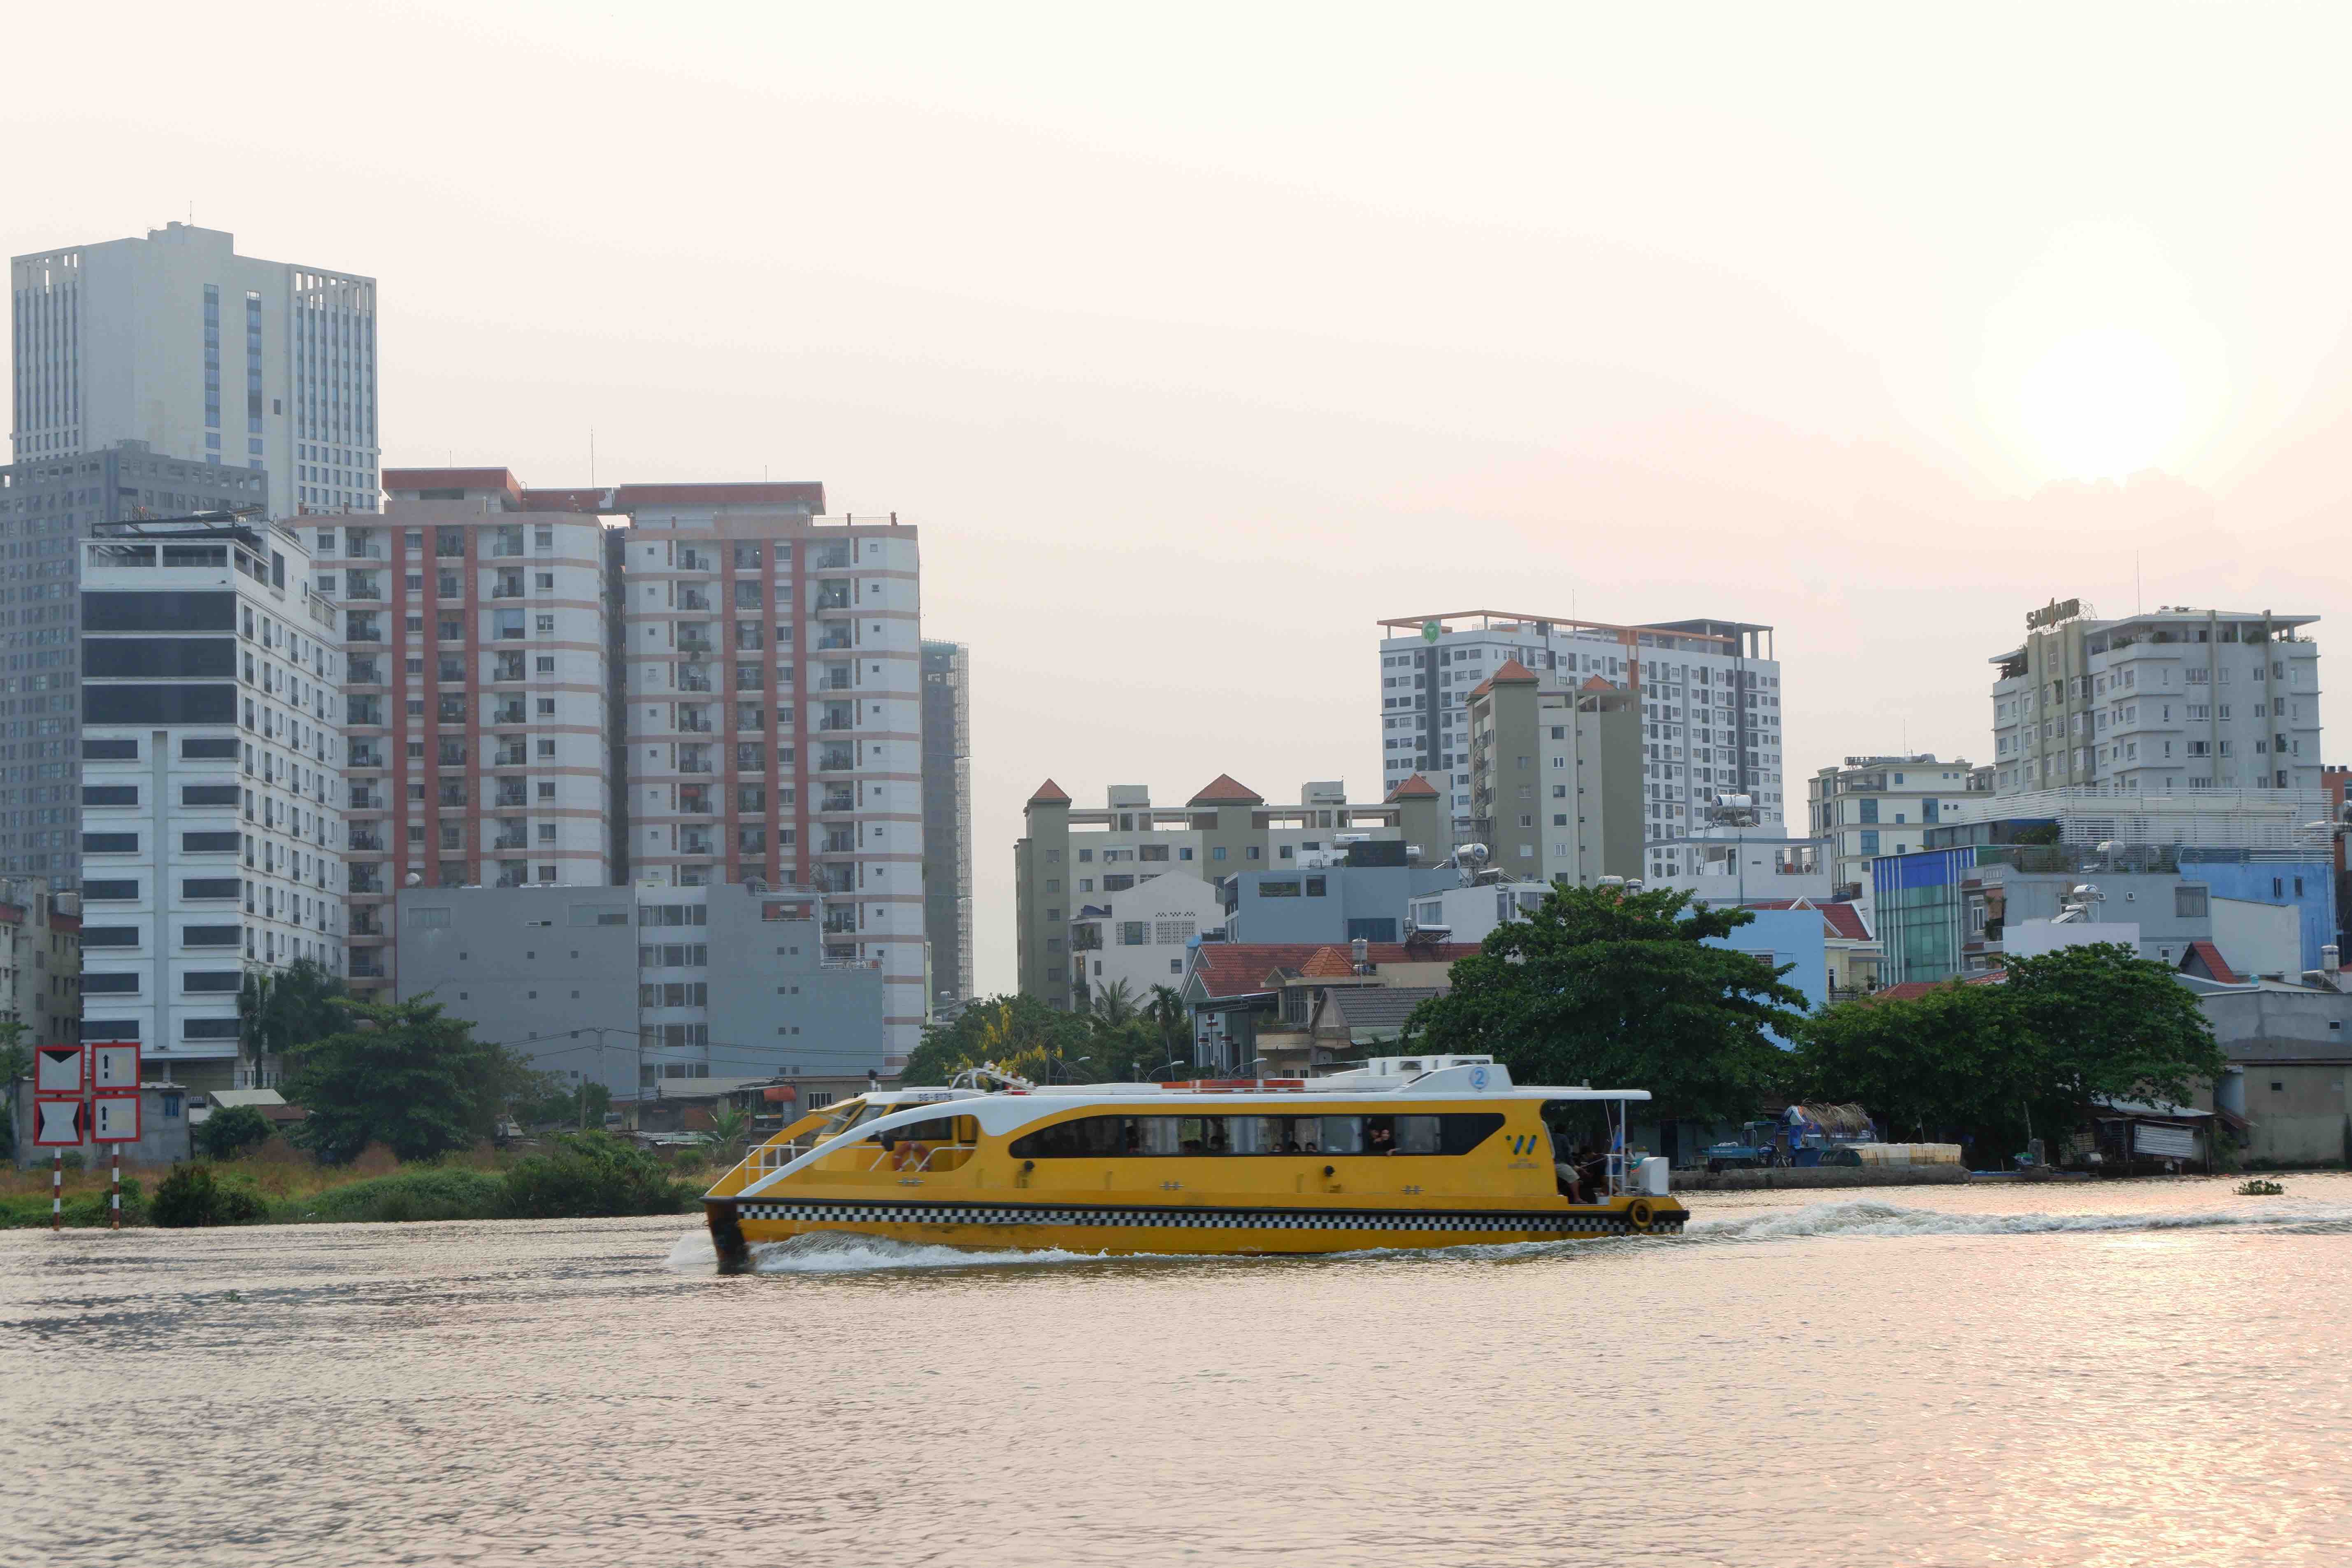 I took a cruise through Saigon by waterbus, and I was not disappointed